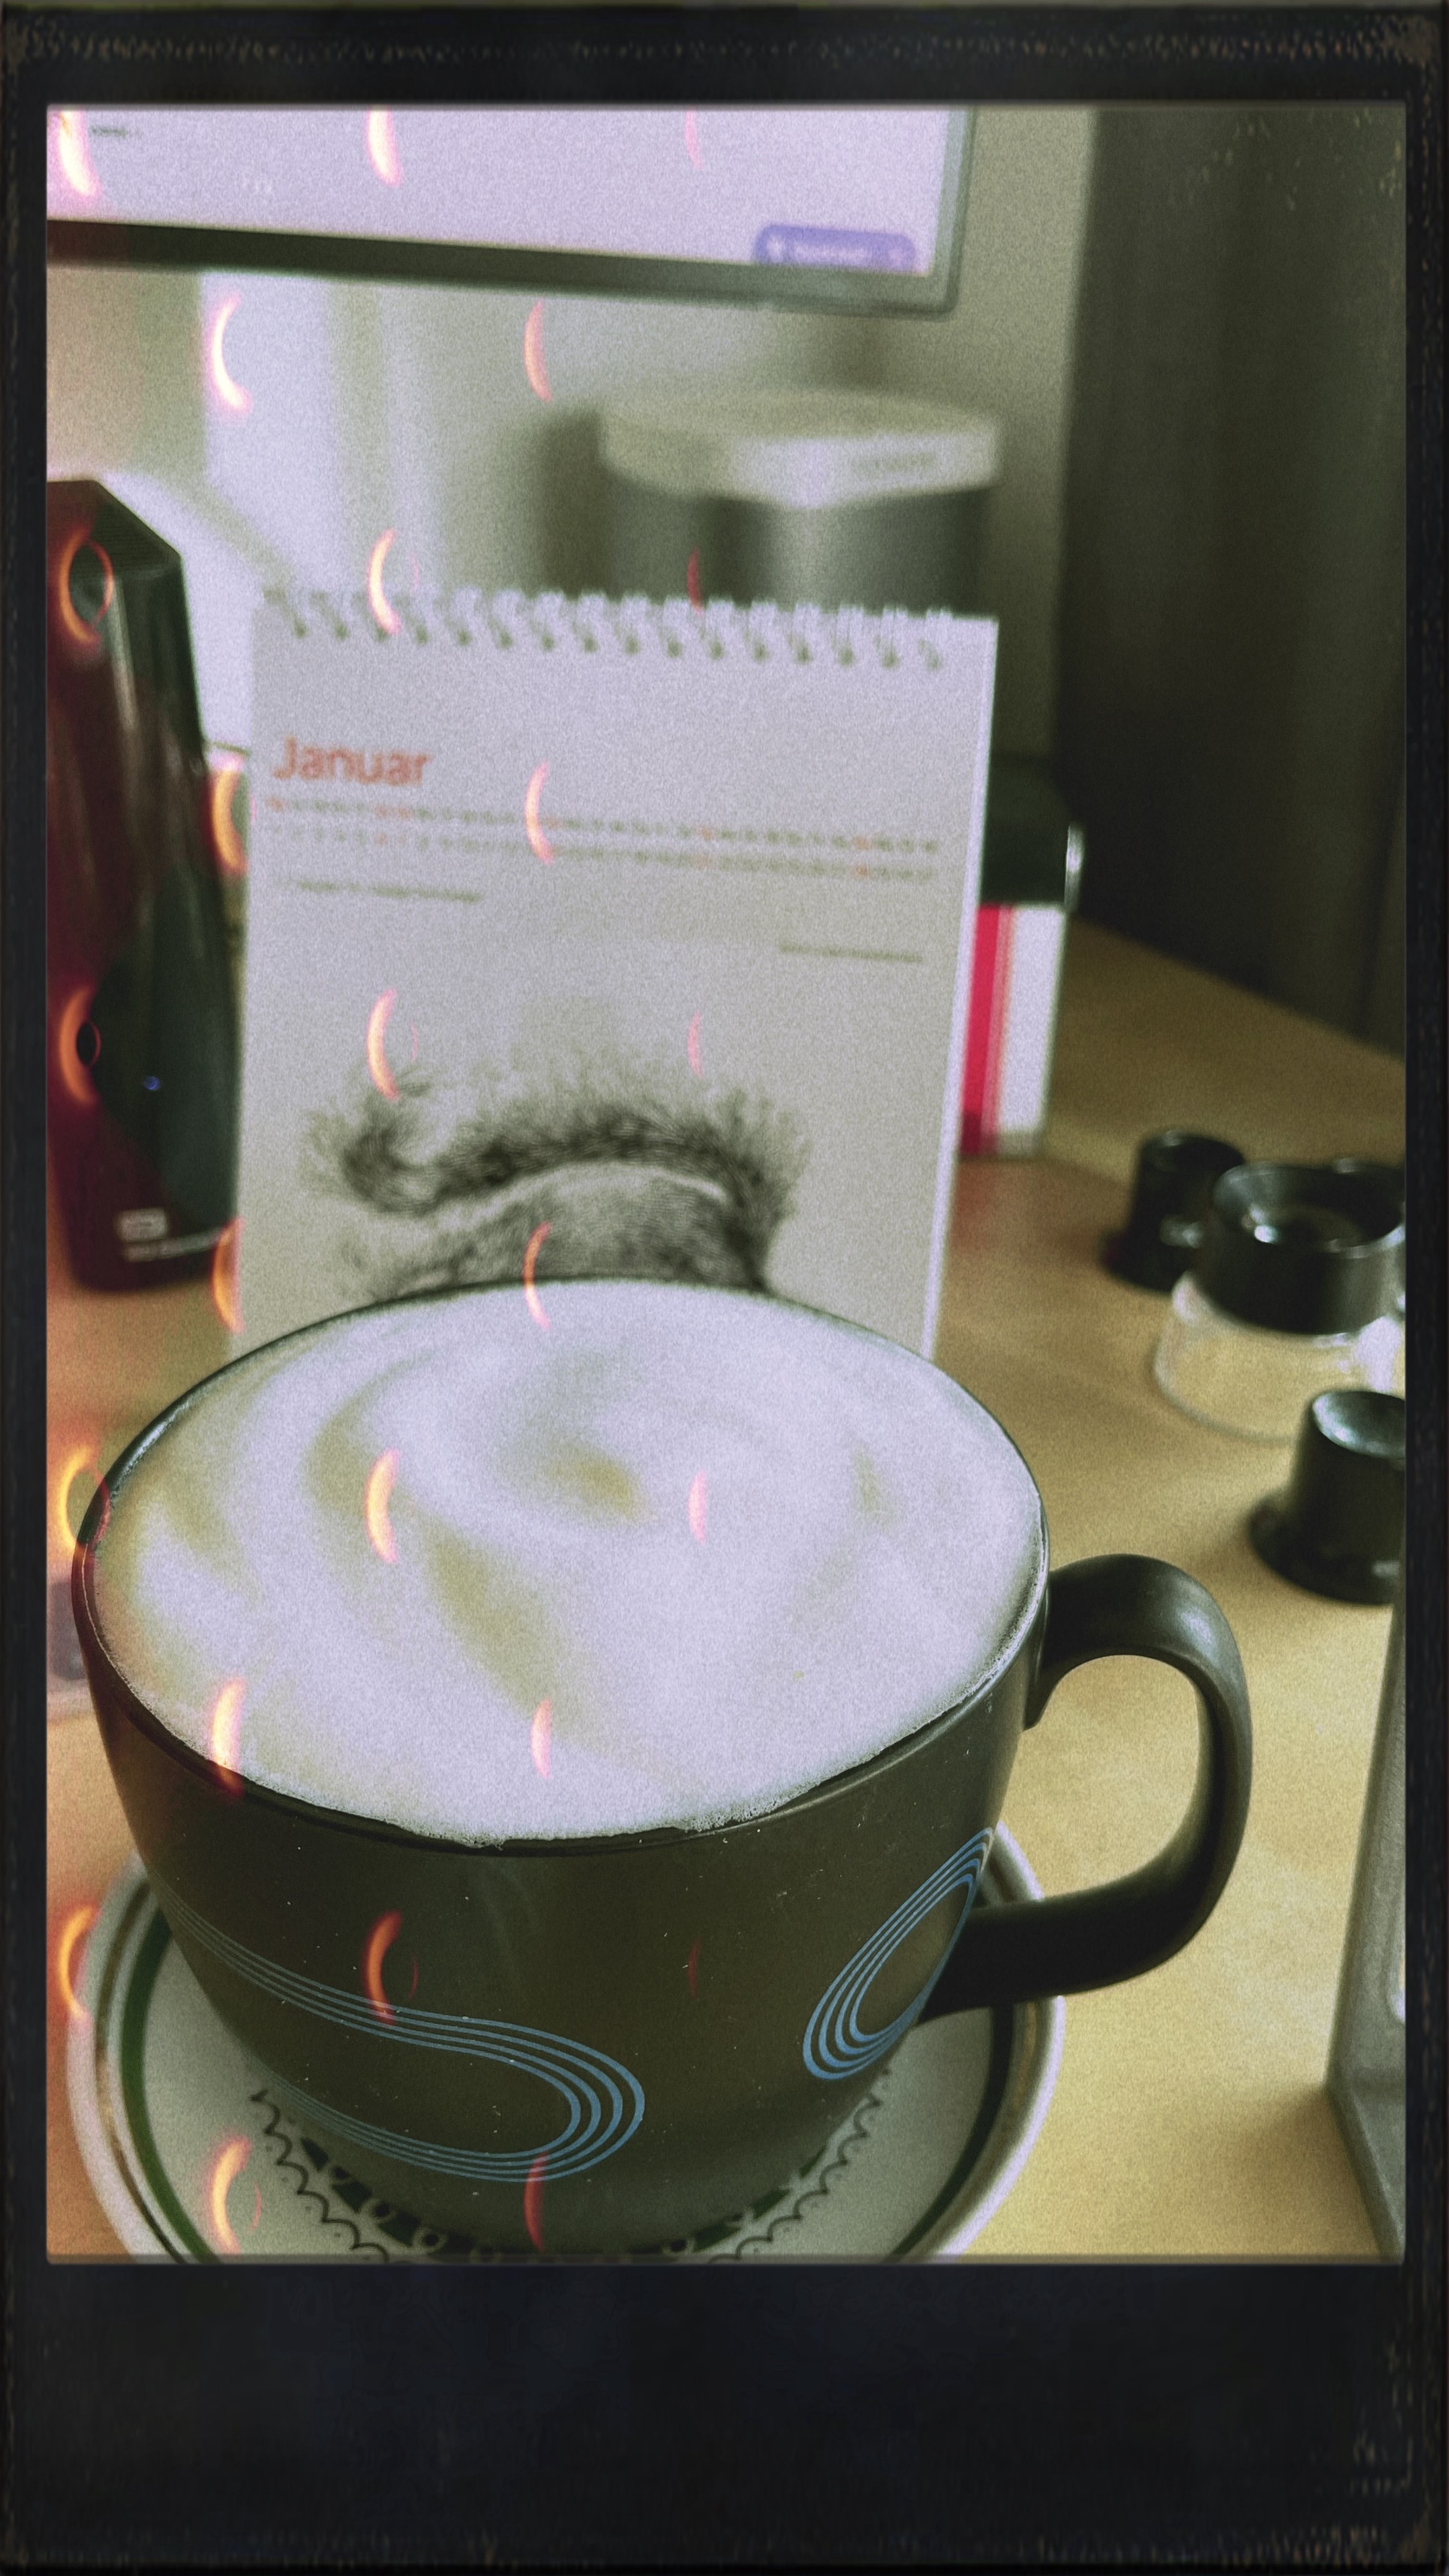 A cup of cappuccino on a saucer with a flip calendar showing January in the background. Vintage filter applied.